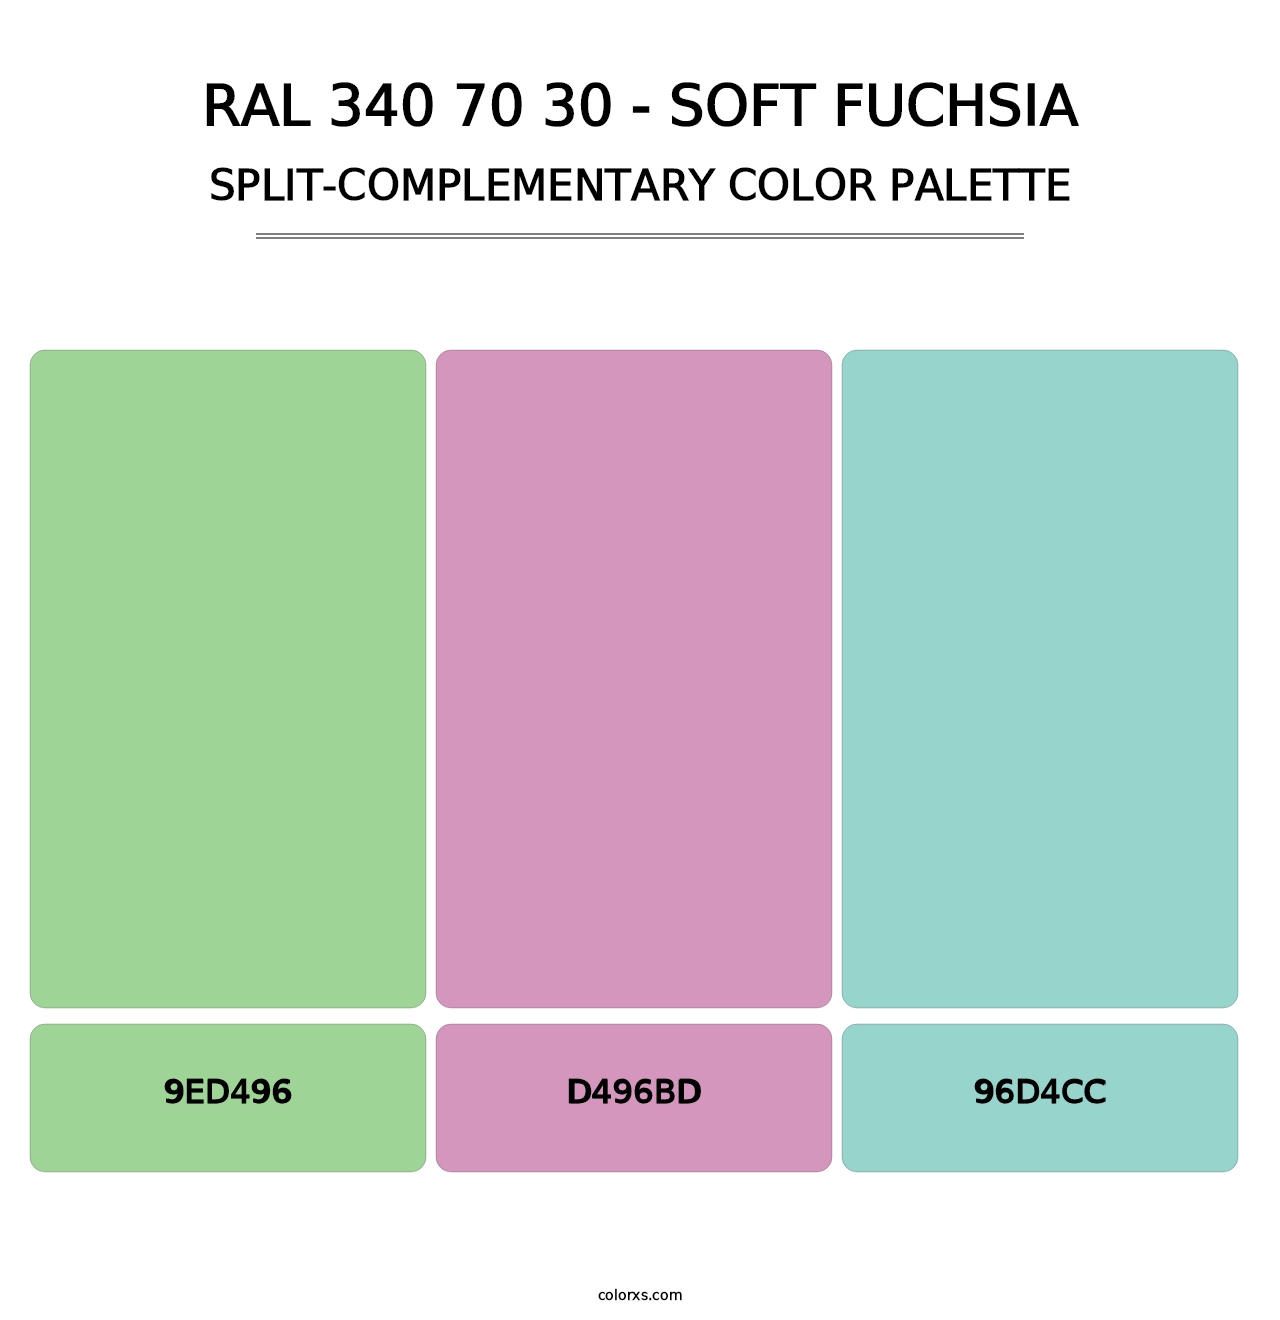 RAL 340 70 30 - Soft Fuchsia - Split-Complementary Color Palette